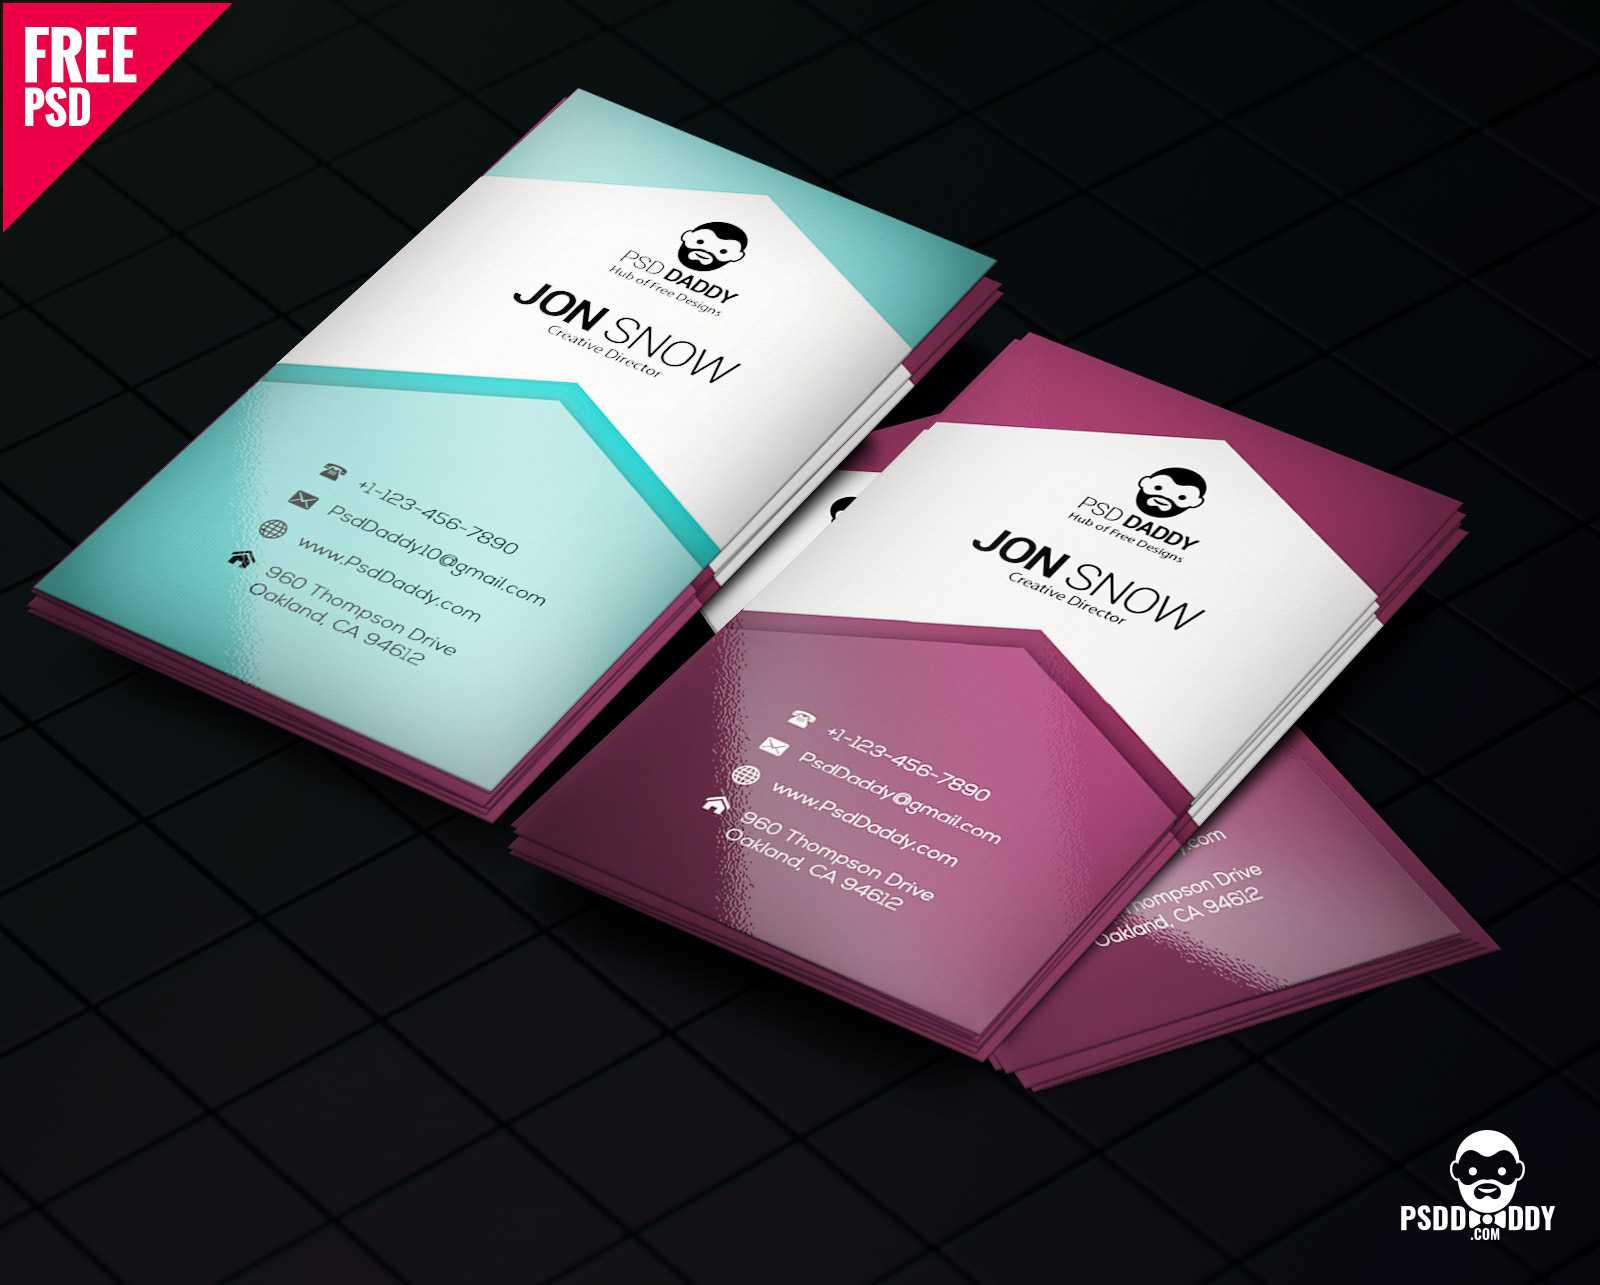 Download]Creative Business Card Psd Free | Psddaddy With Regard To Creative Business Card Templates Psd